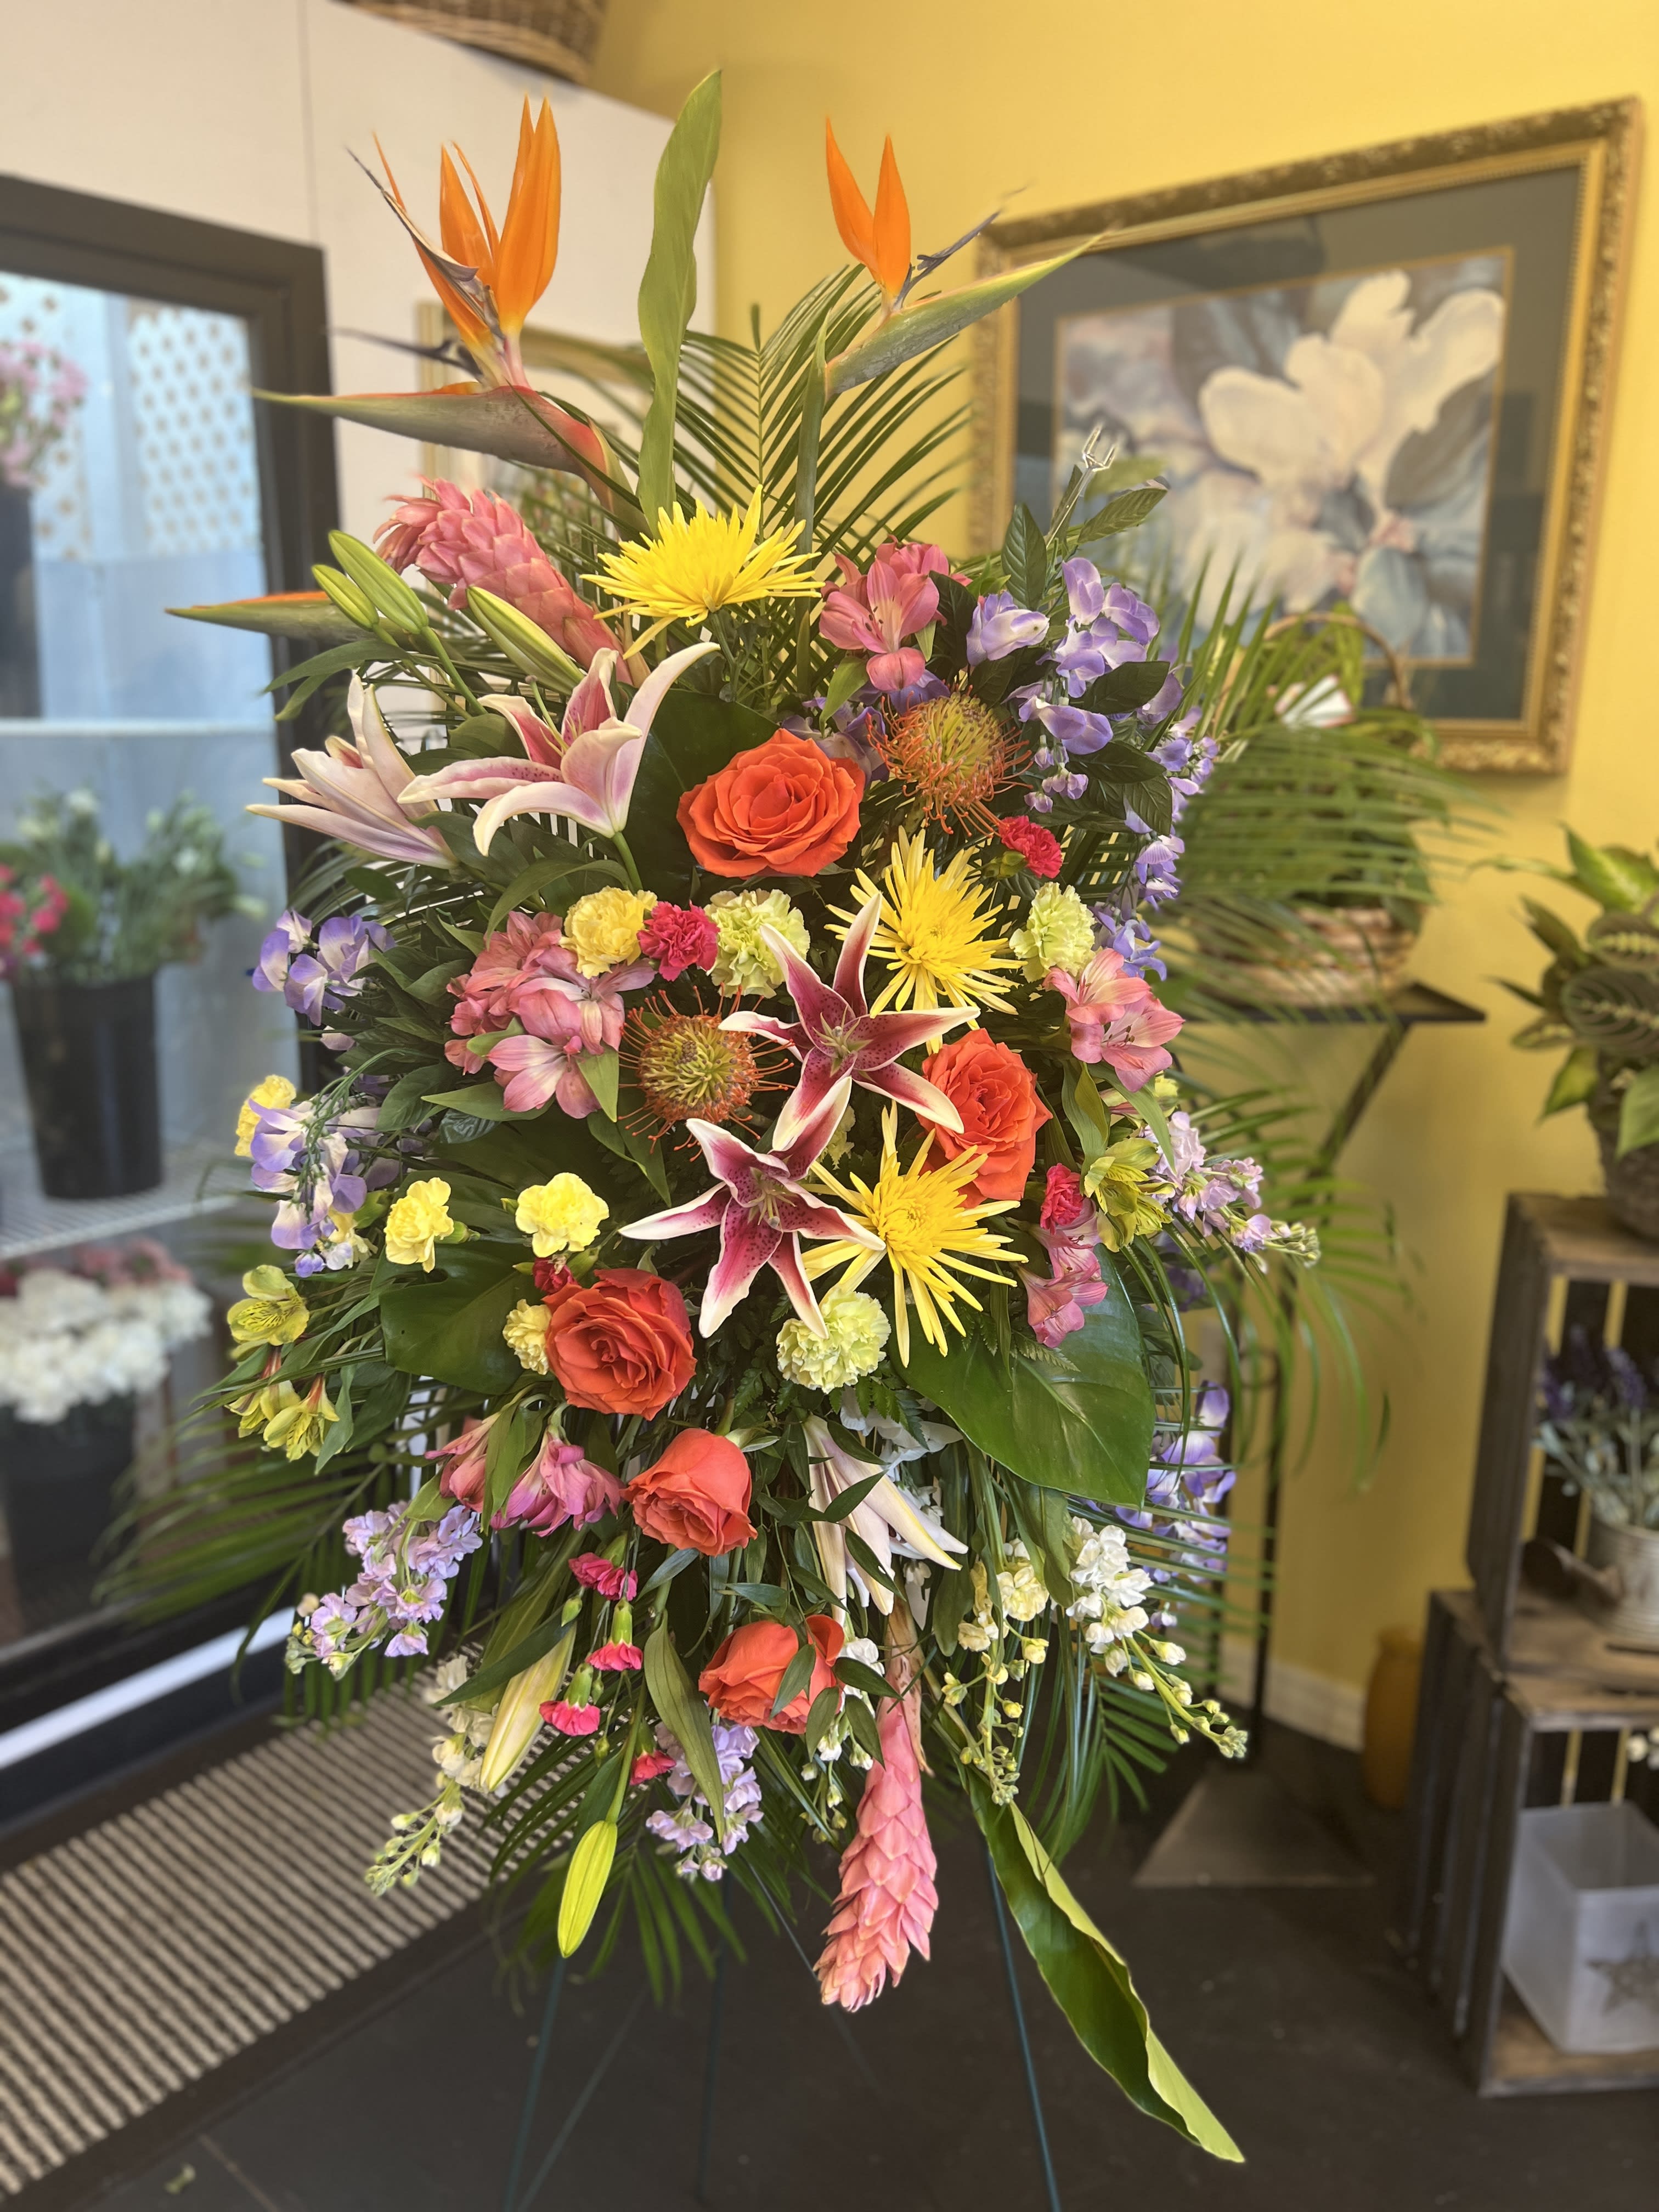 Tropical Tribute - Their passion and joy for life will always be remembered. Our tropical standing spray arrangement was designed to capture that colorful spirit. Elegantly crafted for a lush, full presentation, this vibrant mix of blooms creates a memorable tribute to someone who was truly one-of-a-kind.